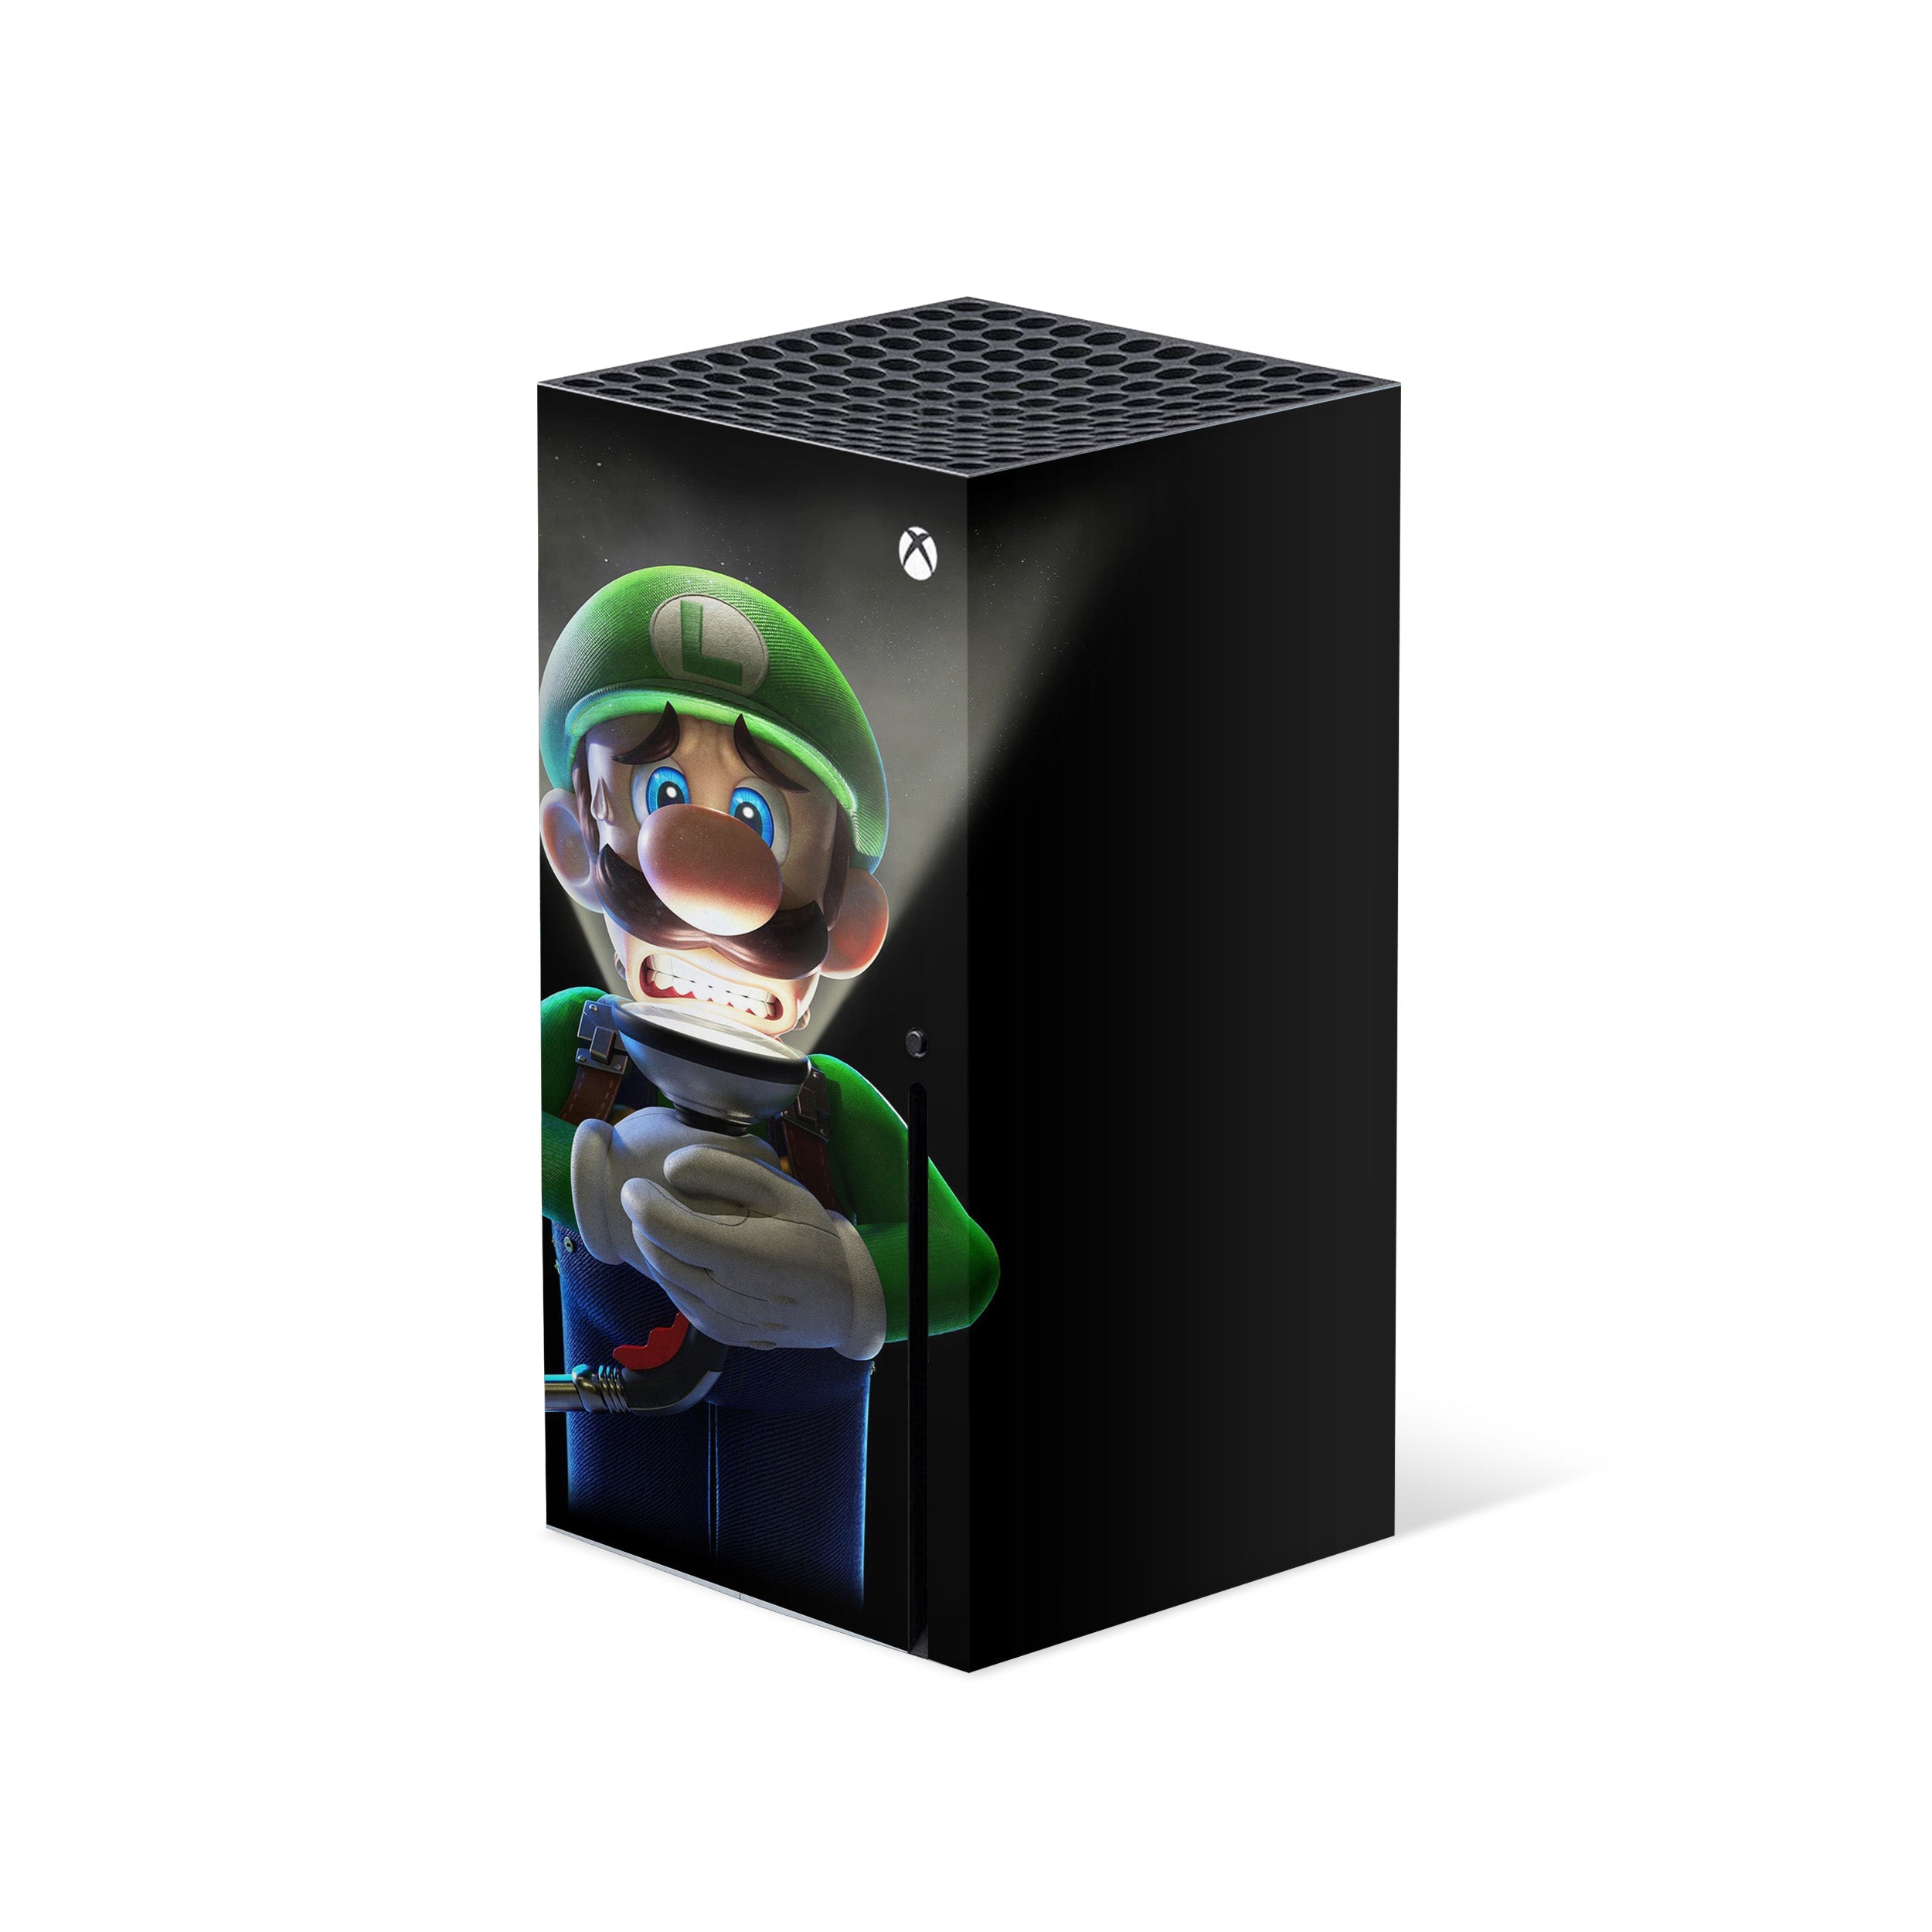 A video game skin featuring a Luigi design for the Xbox Series X.